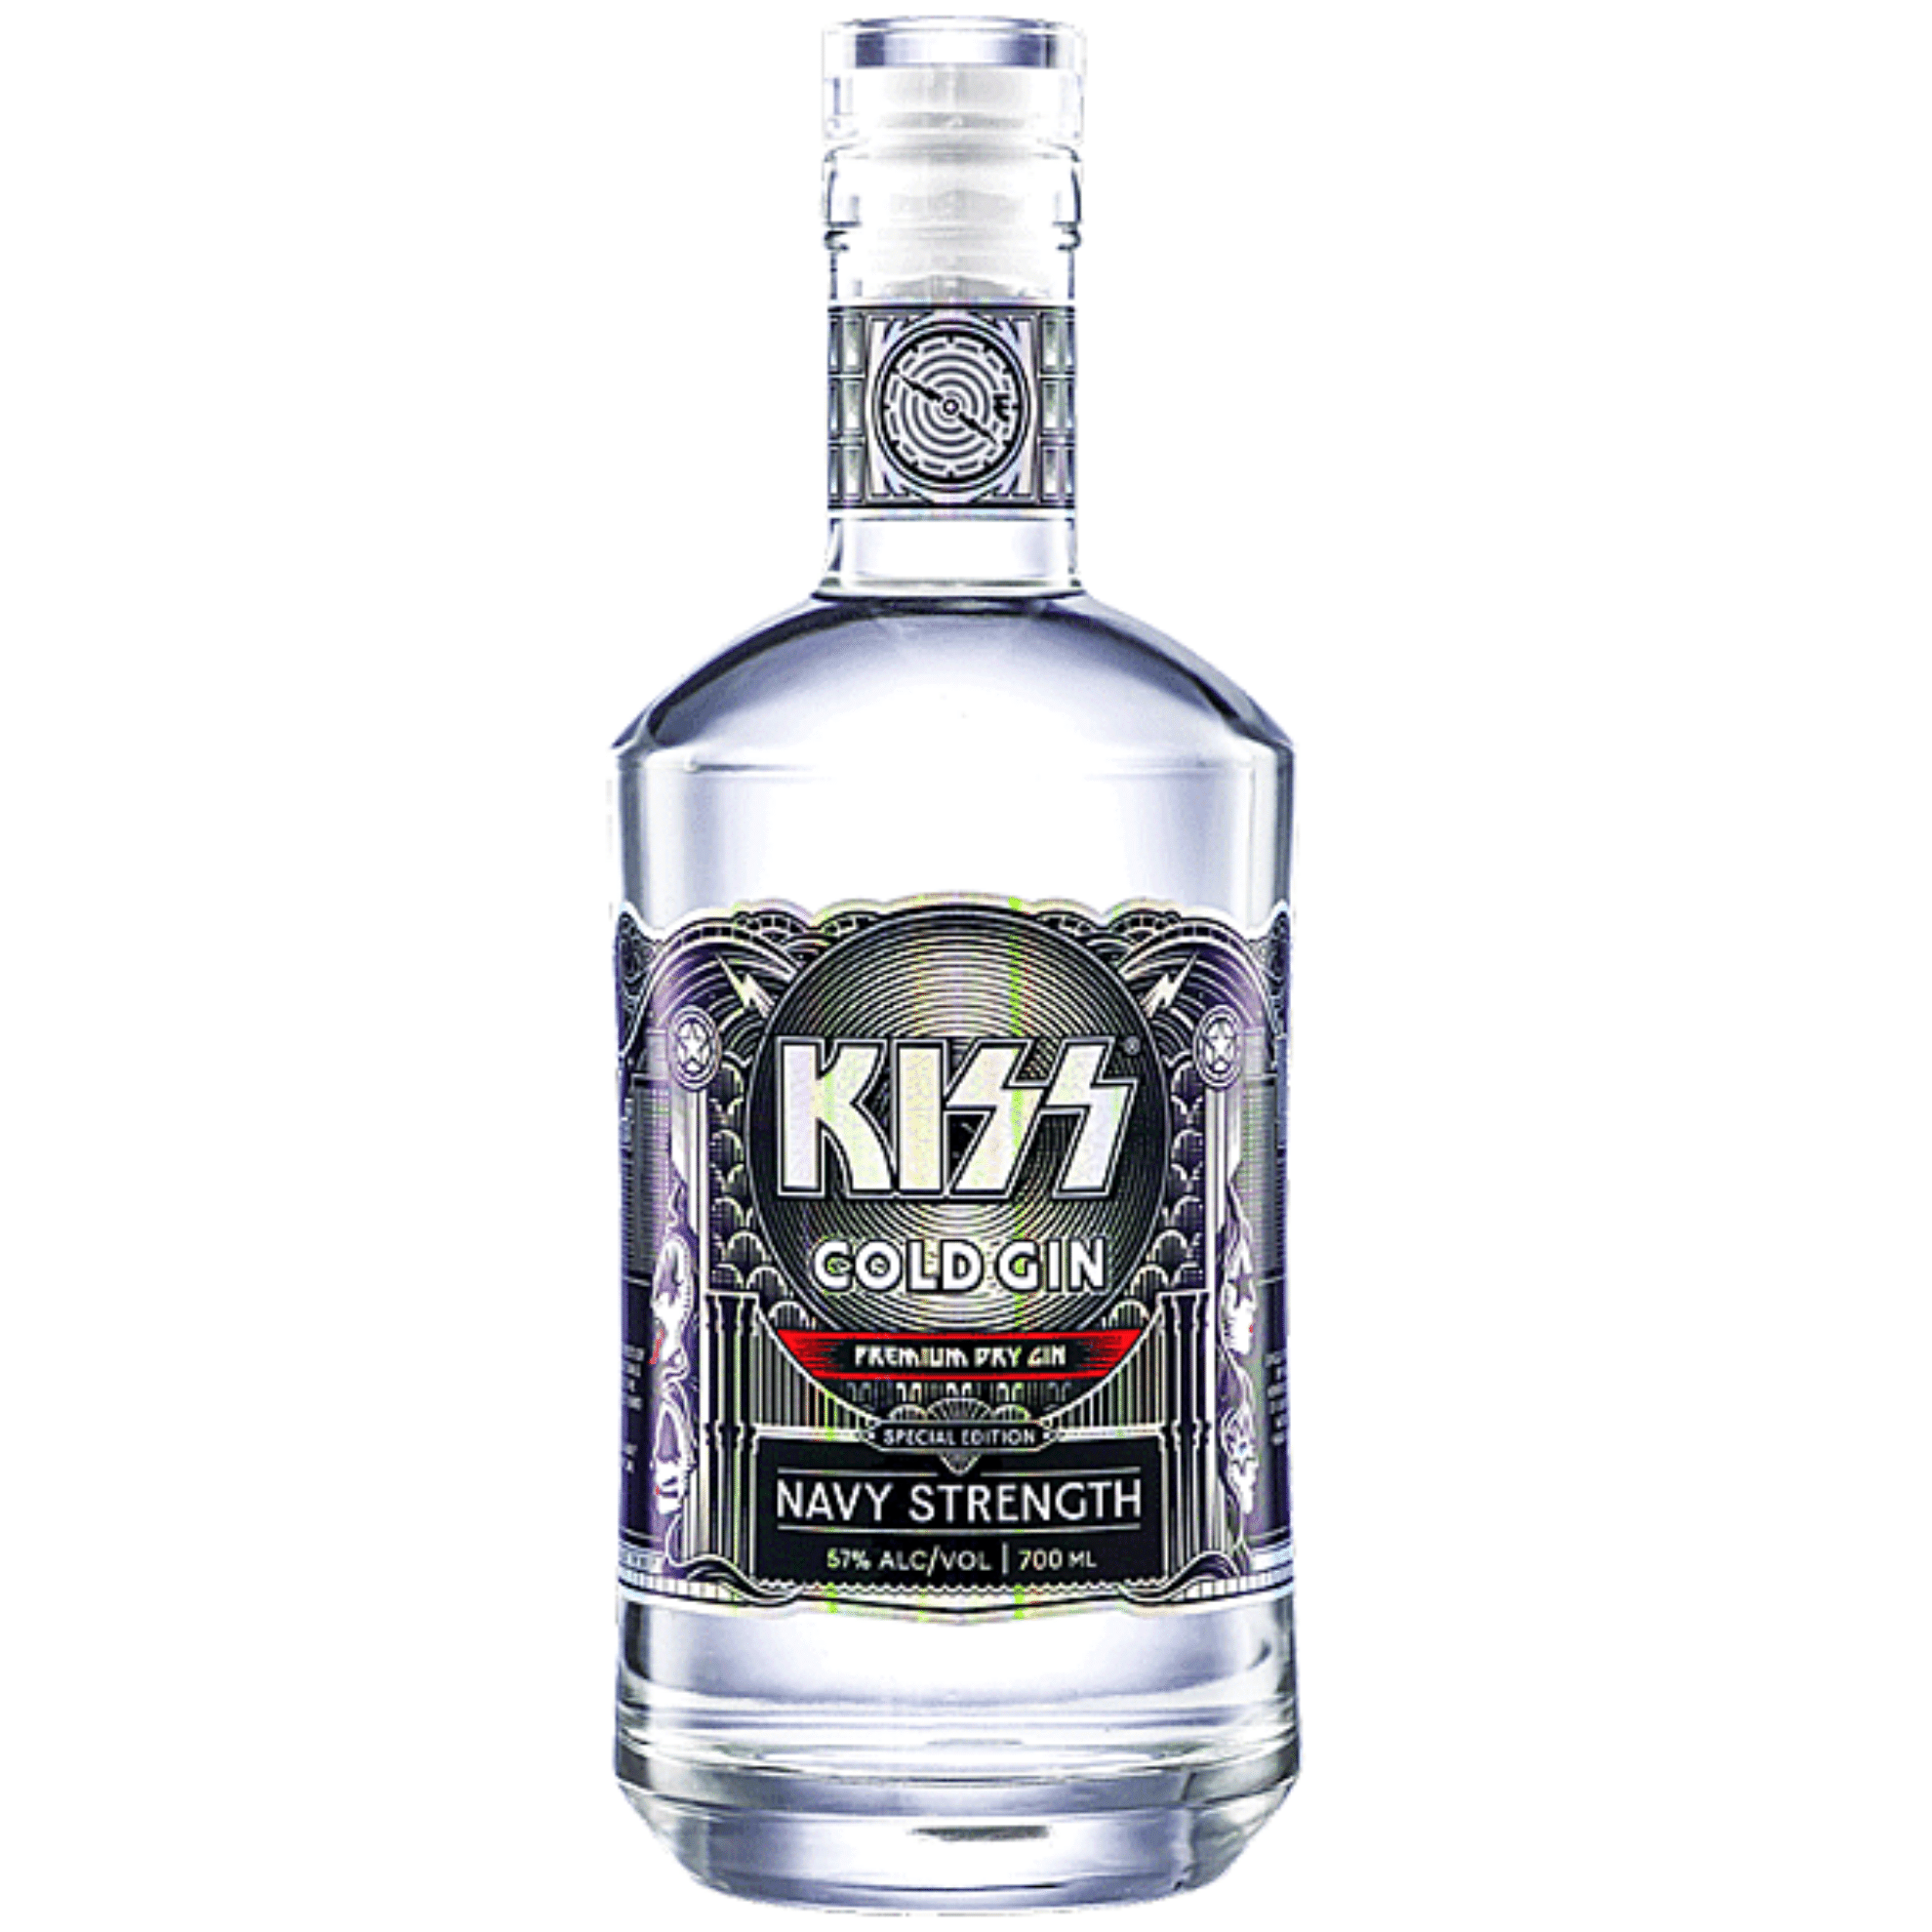 Kiss Cold Navy Strength Gin 57% 0,7l